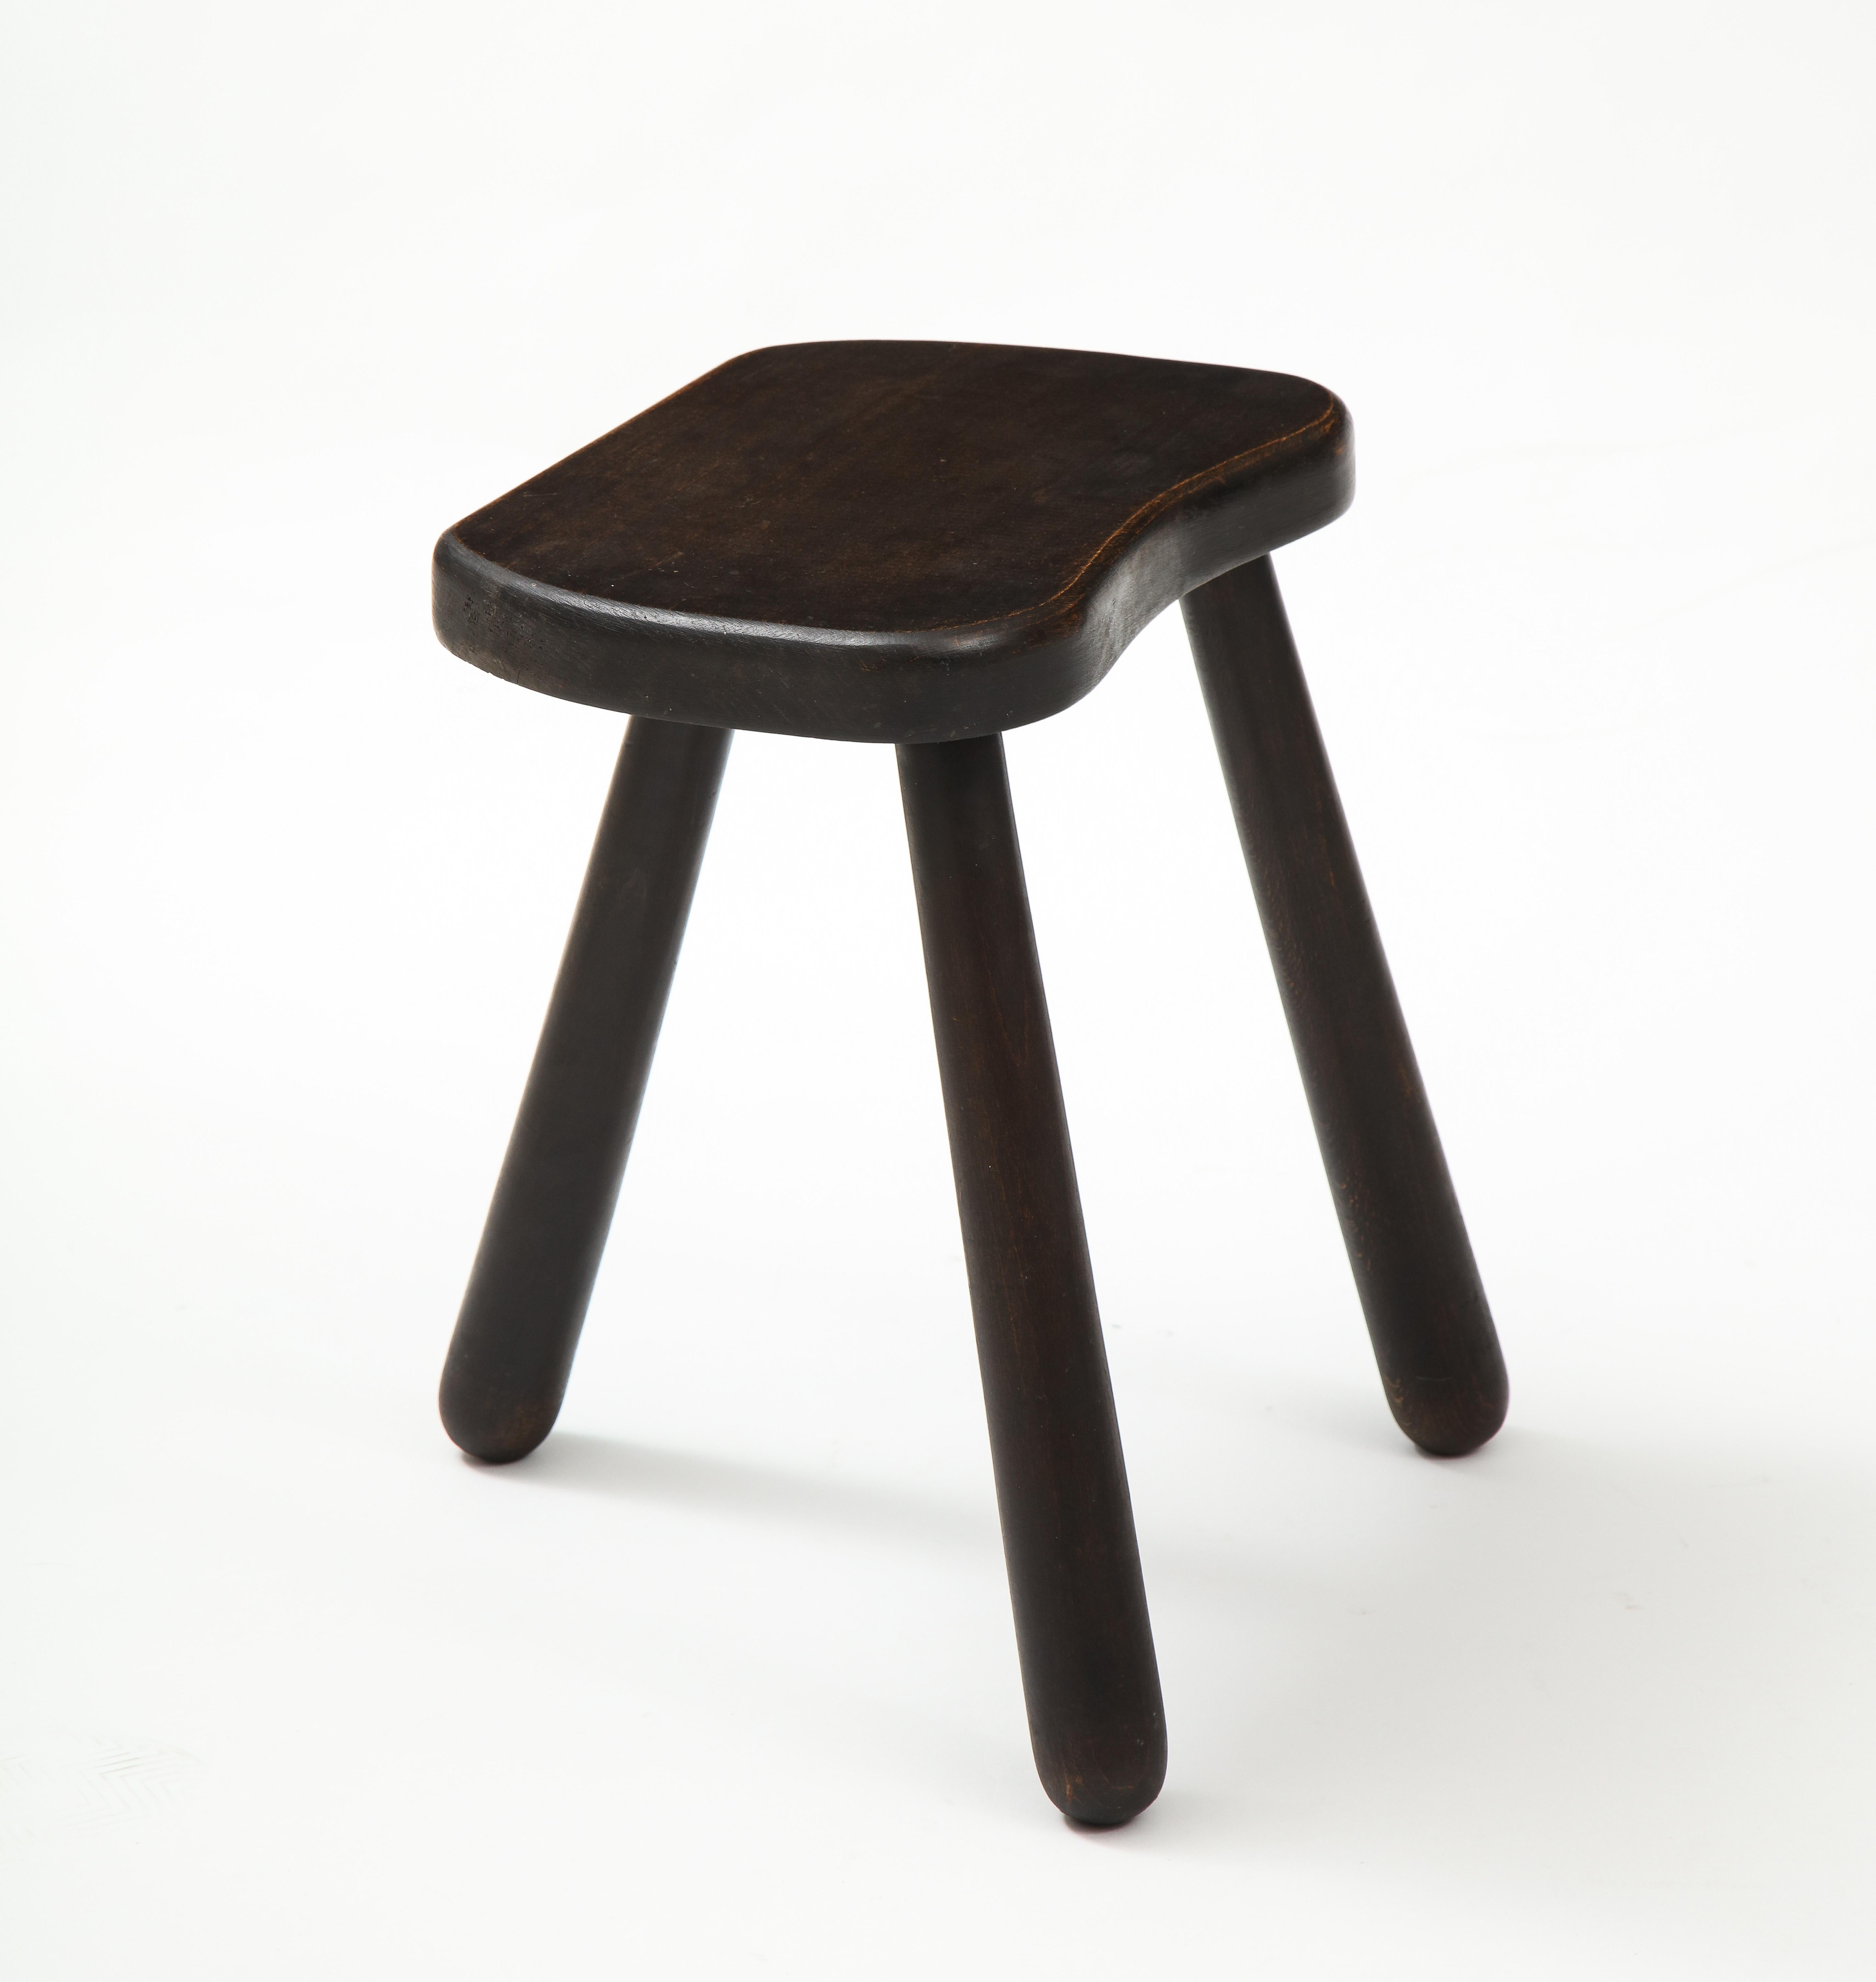 Stained Small Wooden Mid Century Stool with Rounded Legs, France, 1950's